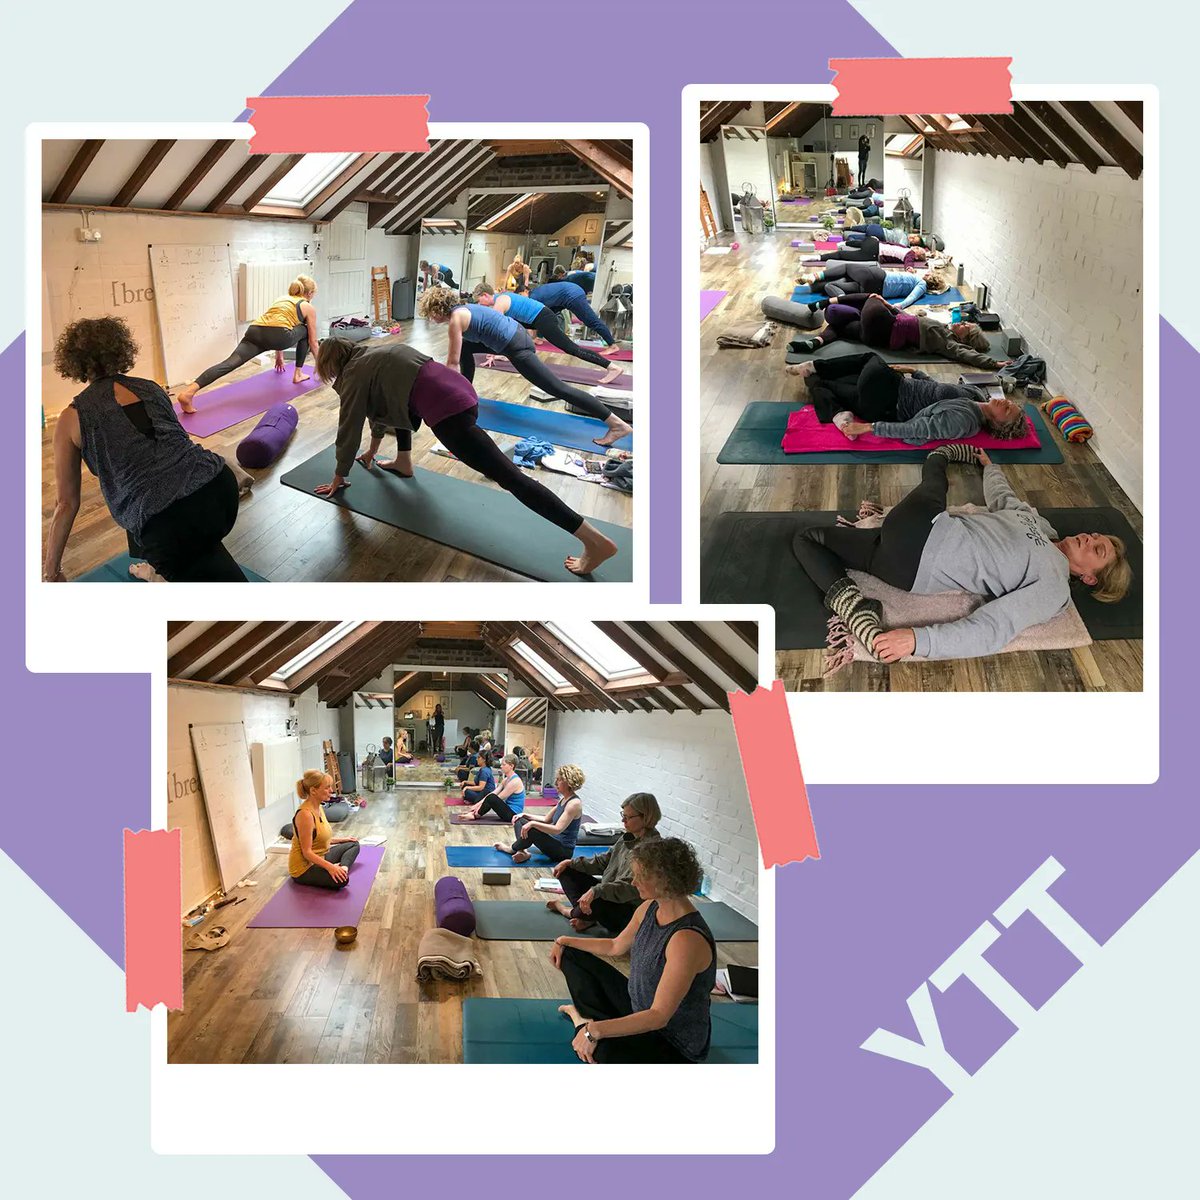 Every YTT weekend is an opportunity to explore different yoga styles. April's weekend was all about chair yoga, yin yoga, and vinyasa yoga focusing on handstands. There was also an incredible cleansing pranayama session which left us all feeling ah-may-zing! #YTT #YogaLife